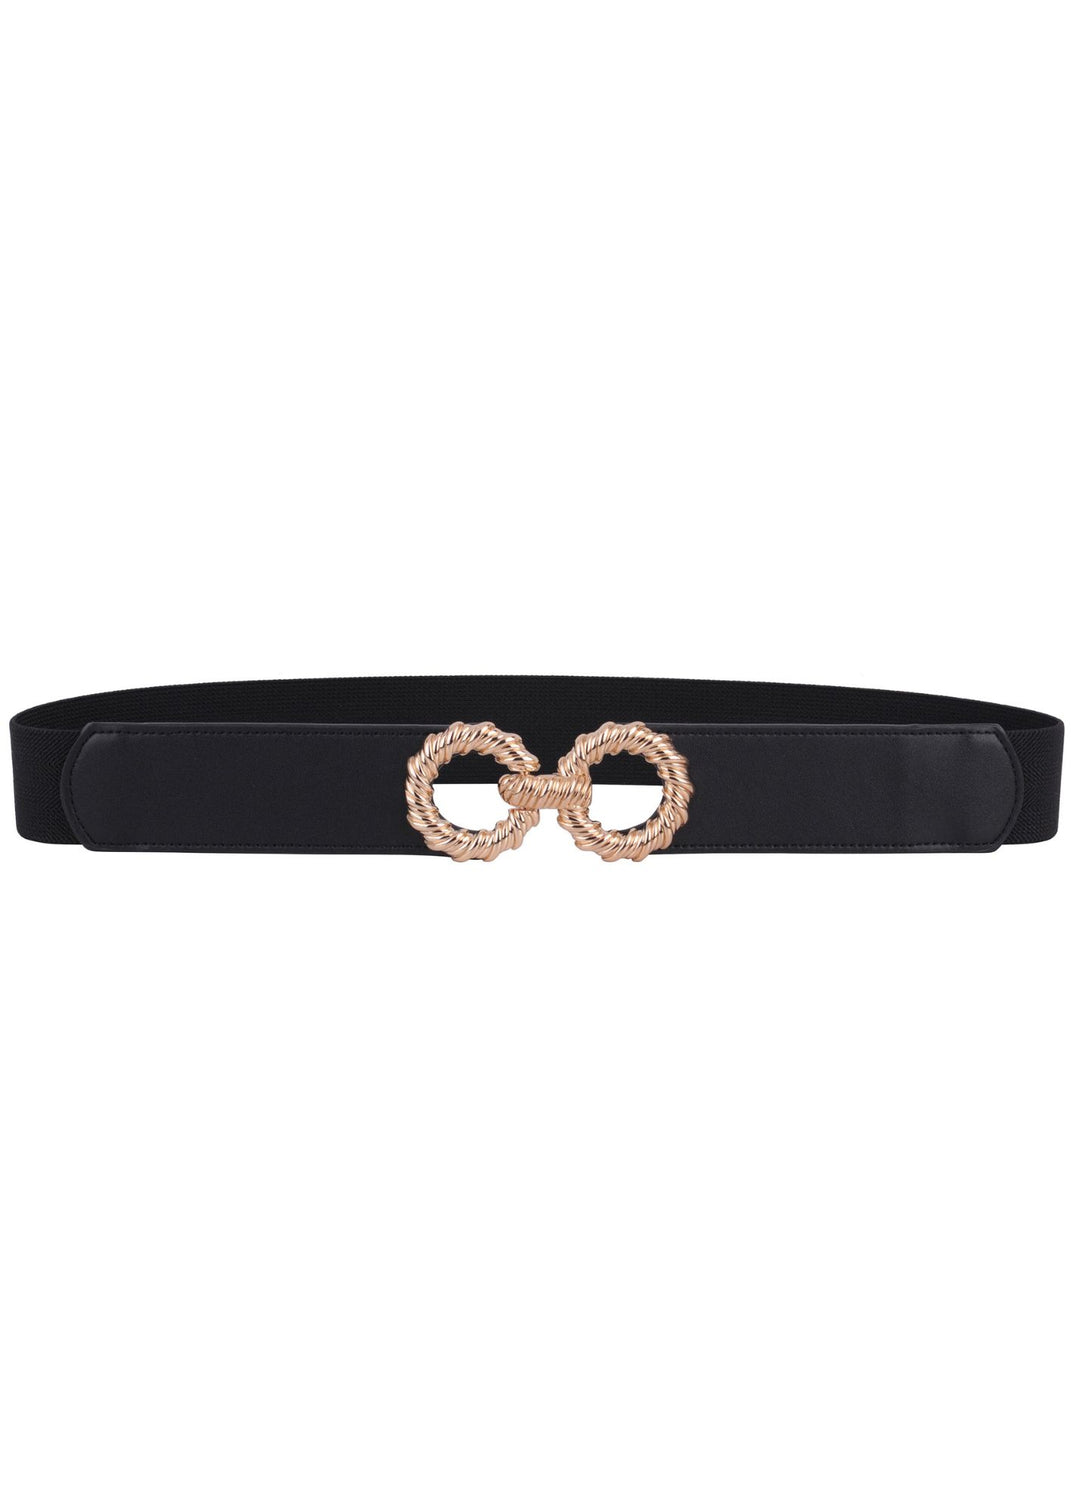 Most Wanted Double Circle Stretch Belt (Black)